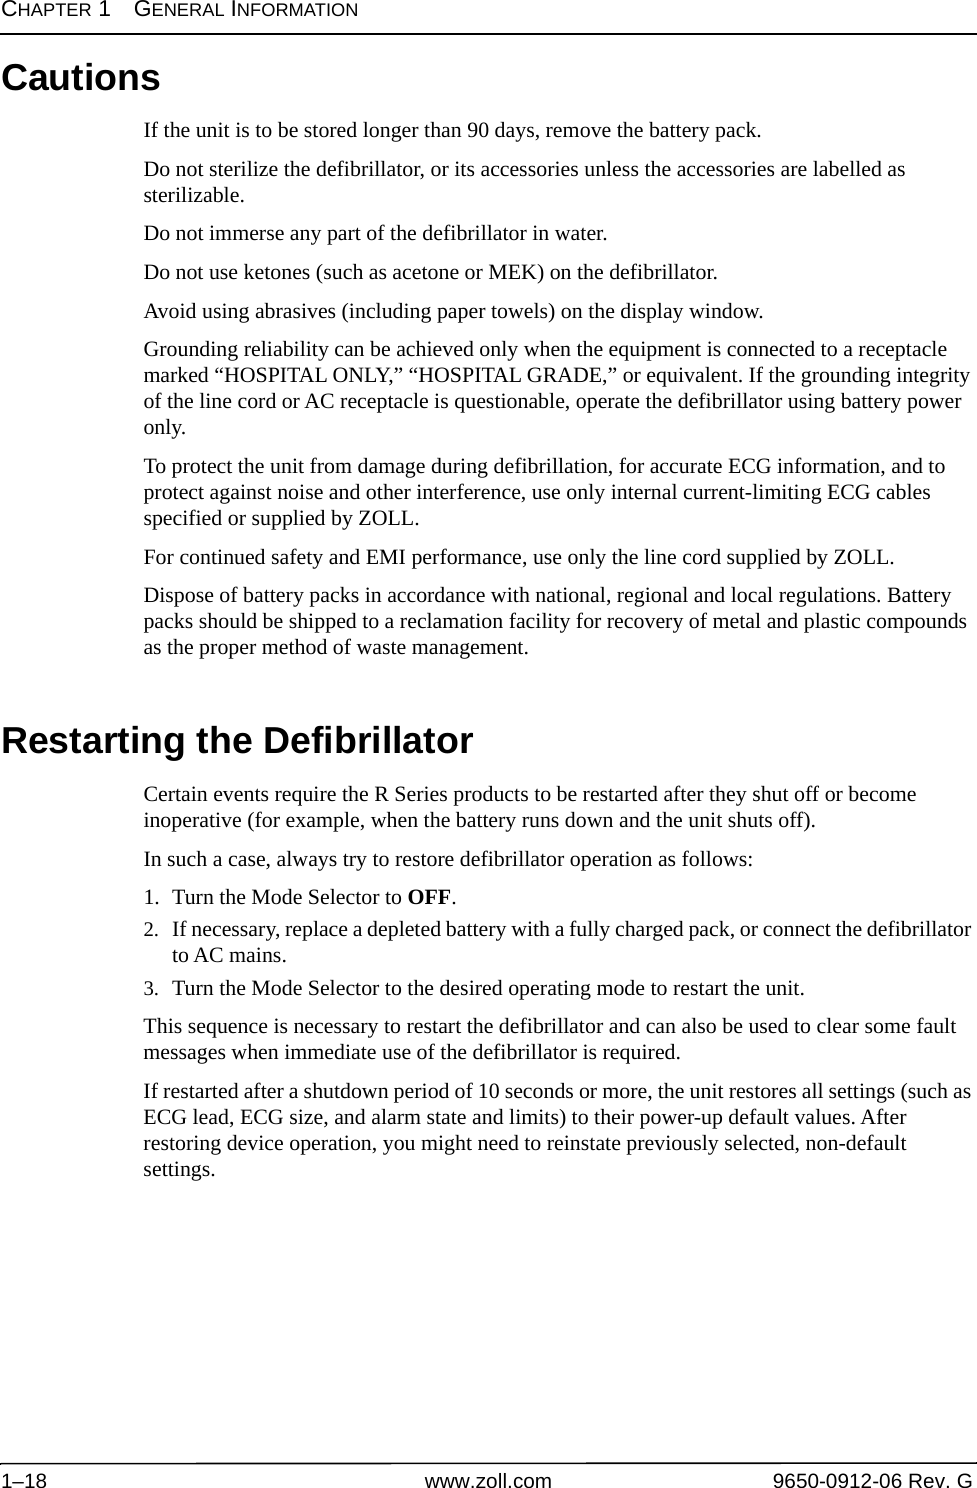 CHAPTER 1GENERAL INFORMATION1–18 www.zoll.com 9650-0912-06 Rev. GCautionsIf the unit is to be stored longer than 90 days, remove the battery pack.Do not sterilize the defibrillator, or its accessories unless the accessories are labelled as sterilizable.Do not immerse any part of the defibrillator in water.Do not use ketones (such as acetone or MEK) on the defibrillator.Avoid using abrasives (including paper towels) on the display window.Grounding reliability can be achieved only when the equipment is connected to a receptacle marked “HOSPITAL ONLY,” “HOSPITAL GRADE,” or equivalent. If the grounding integrity of the line cord or AC receptacle is questionable, operate the defibrillator using battery power only.To protect the unit from damage during defibrillation, for accurate ECG information, and to protect against noise and other interference, use only internal current-limiting ECG cables specified or supplied by ZOLL.For continued safety and EMI performance, use only the line cord supplied by ZOLL.Dispose of battery packs in accordance with national, regional and local regulations. Battery packs should be shipped to a reclamation facility for recovery of metal and plastic compounds as the proper method of waste management.Restarting the DefibrillatorCertain events require the R Series products to be restarted after they shut off or become inoperative (for example, when the battery runs down and the unit shuts off).In such a case, always try to restore defibrillator operation as follows:1. Turn the Mode Selector to OFF.2. If necessary, replace a depleted battery with a fully charged pack, or connect the defibrillator to AC mains.3. Turn the Mode Selector to the desired operating mode to restart the unit.This sequence is necessary to restart the defibrillator and can also be used to clear some fault messages when immediate use of the defibrillator is required.If restarted after a shutdown period of 10 seconds or more, the unit restores all settings (such as ECG lead, ECG size, and alarm state and limits) to their power-up default values. After restoring device operation, you might need to reinstate previously selected, non-default settings.